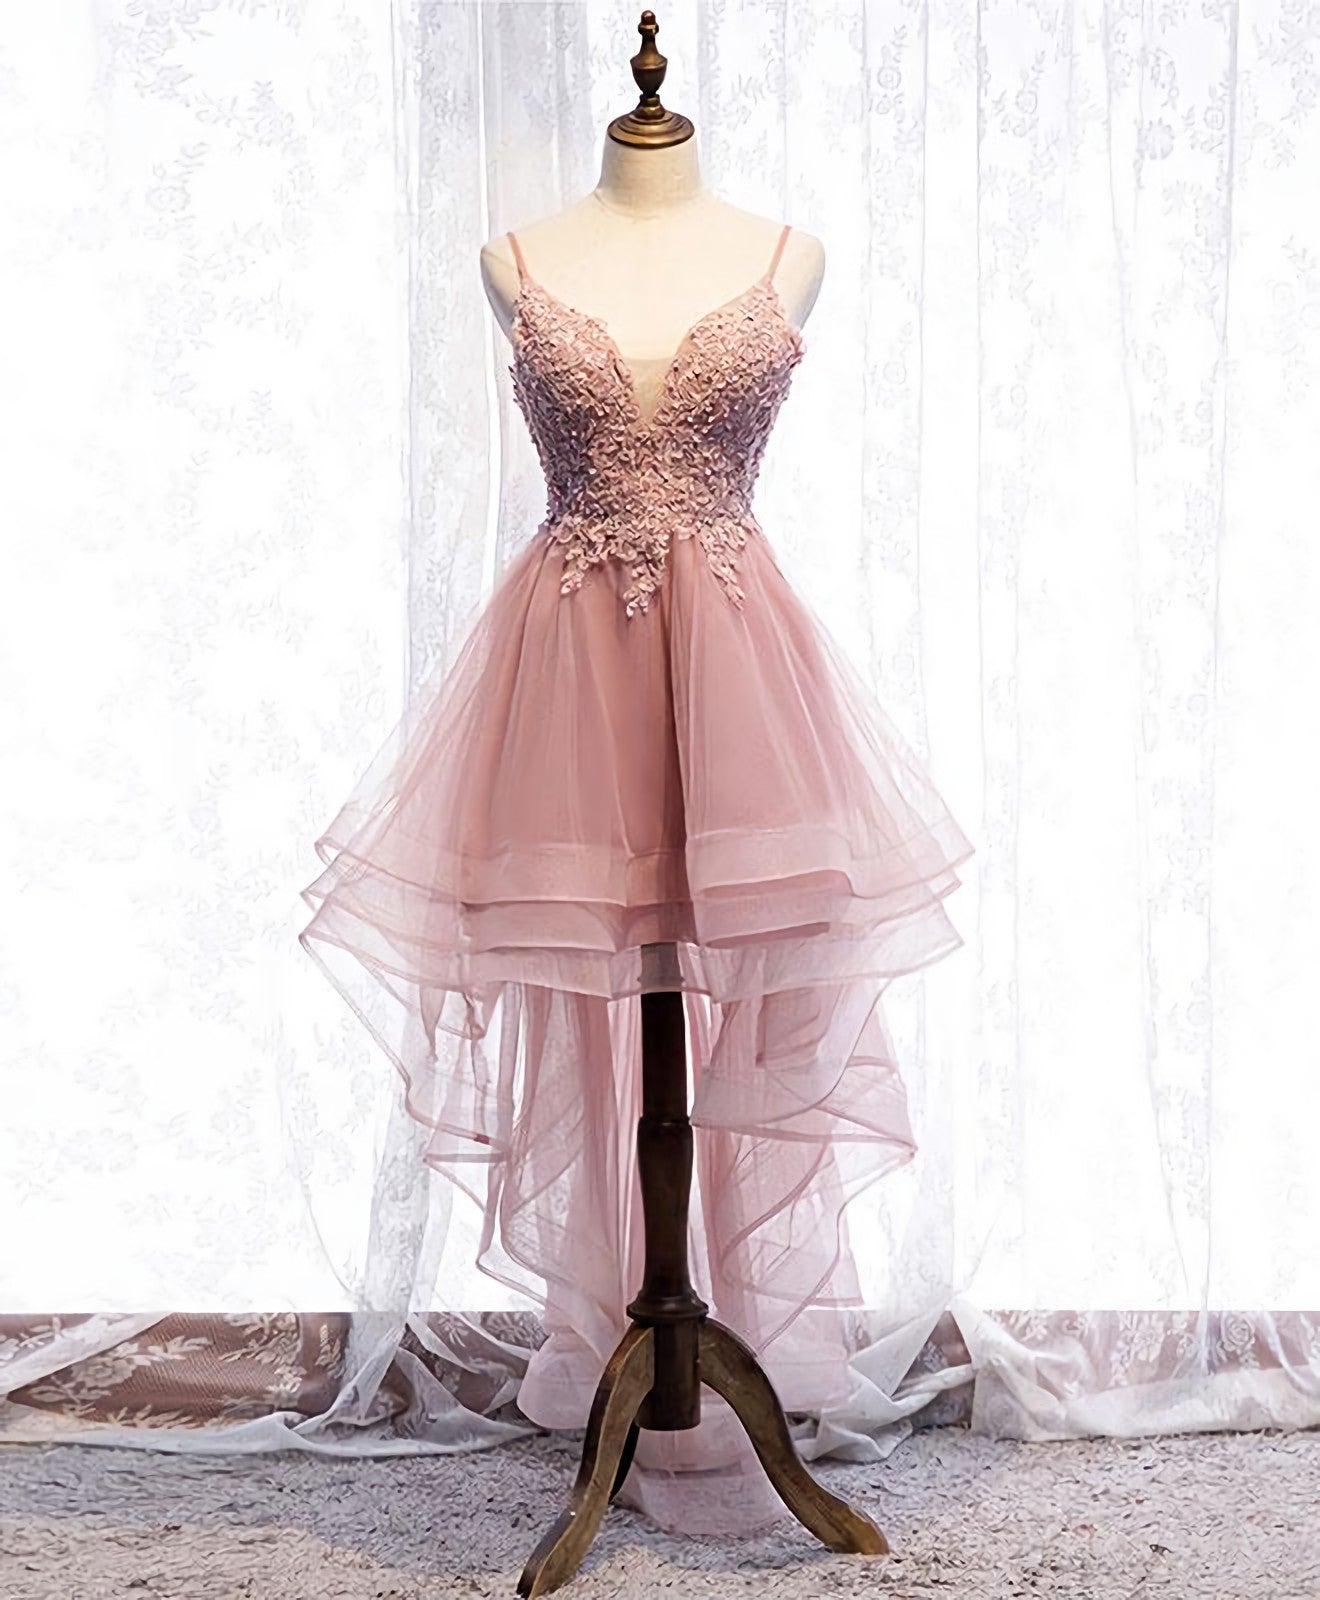 Homecoming Dresses Aesthetic, Pink Tulle Lace High Low Prom Dress, Pink Homecoming Dress, 1